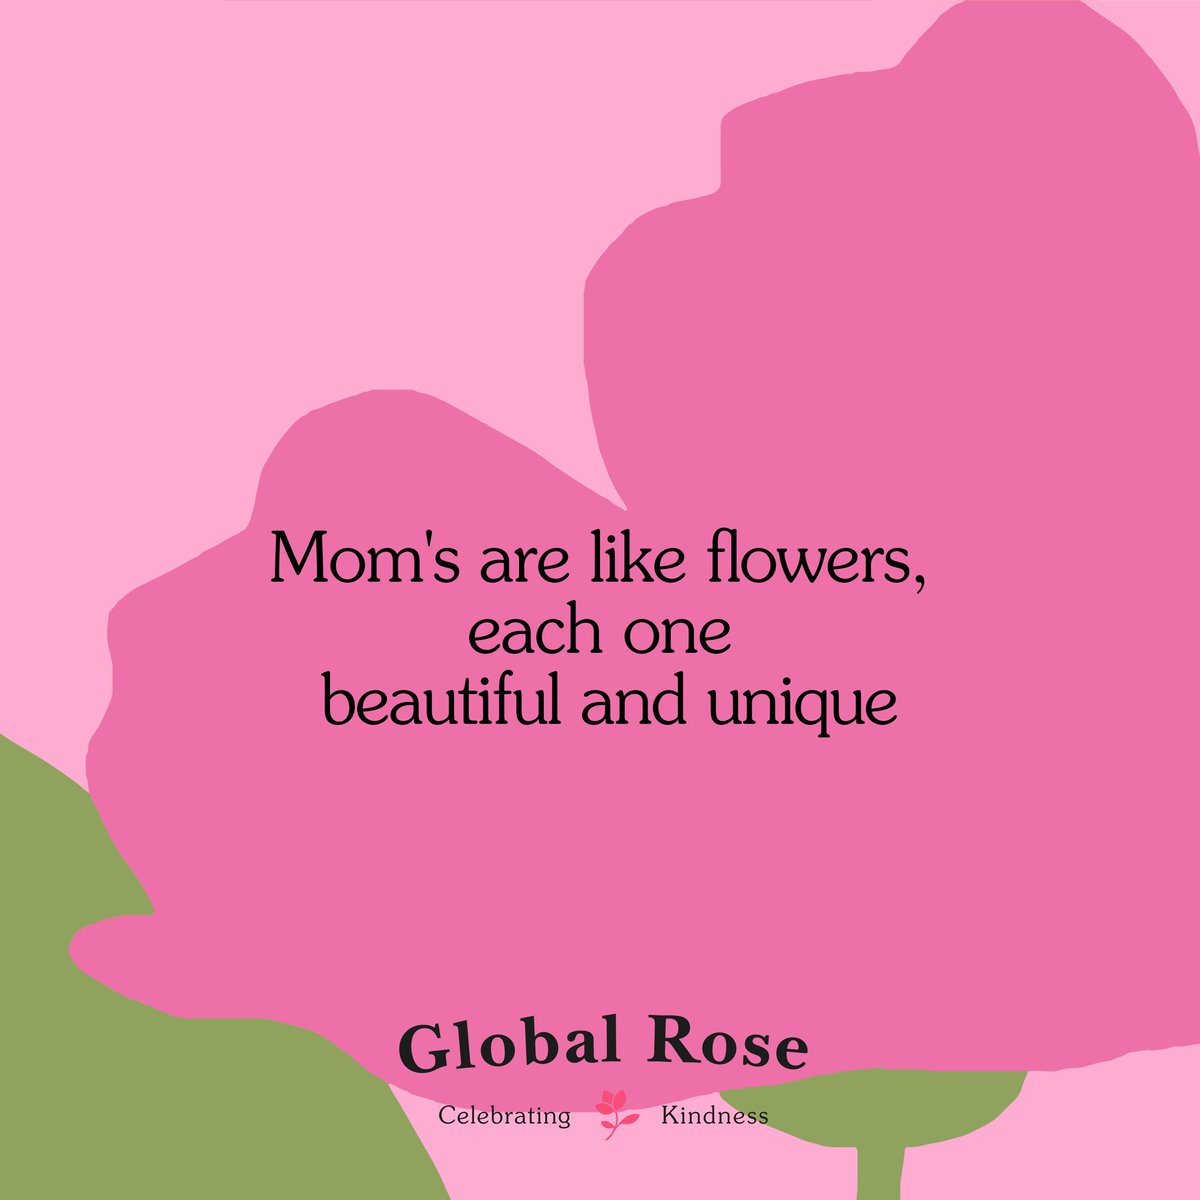 Mom’s are like flowers 🌸, each one beautiful and unique! Shop online 💐 globalrose.com 
•​
#mothersday #flowersmothersday #flowers #flowersdelivery #usaflowers #globalrose